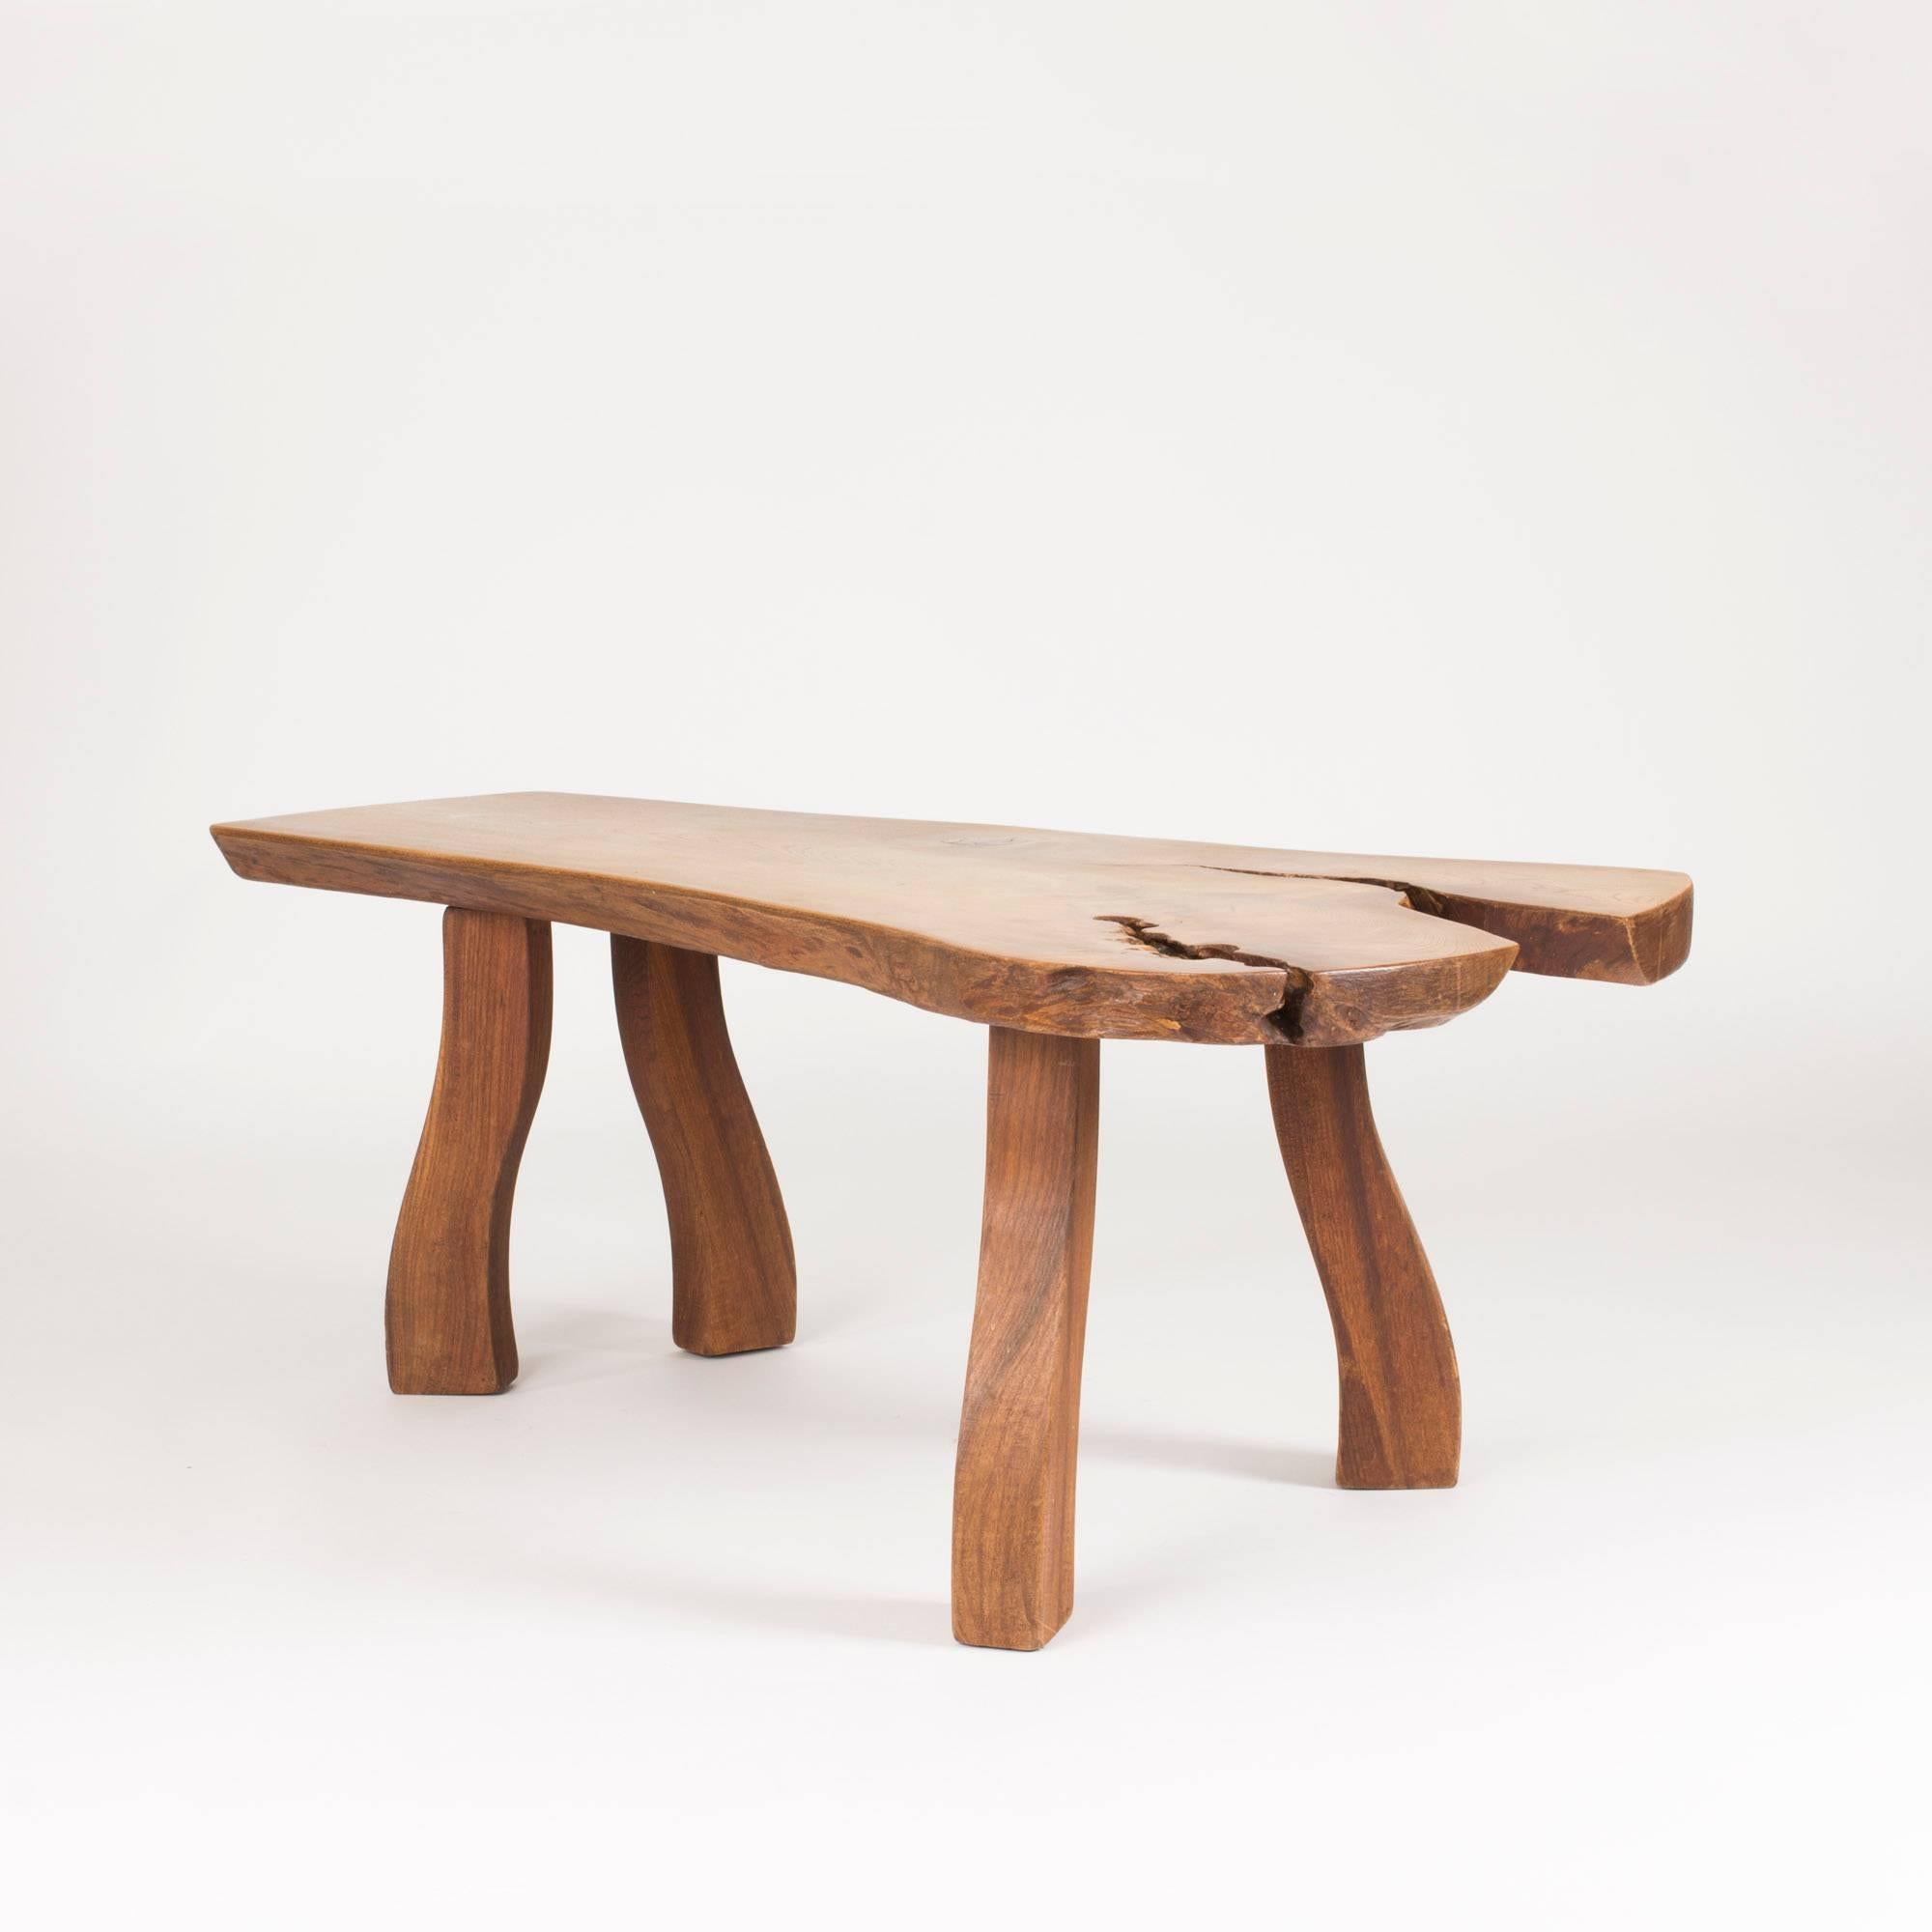 Striking elmwood coffee table by Carl-Axel Beijbom, made from an elmwood slab with interesting knots and wood grain. Beautiful, oiled surface. Sturdy, sculpted legs that pick up the organic design of the tabletop. Can alternatively be used as a side